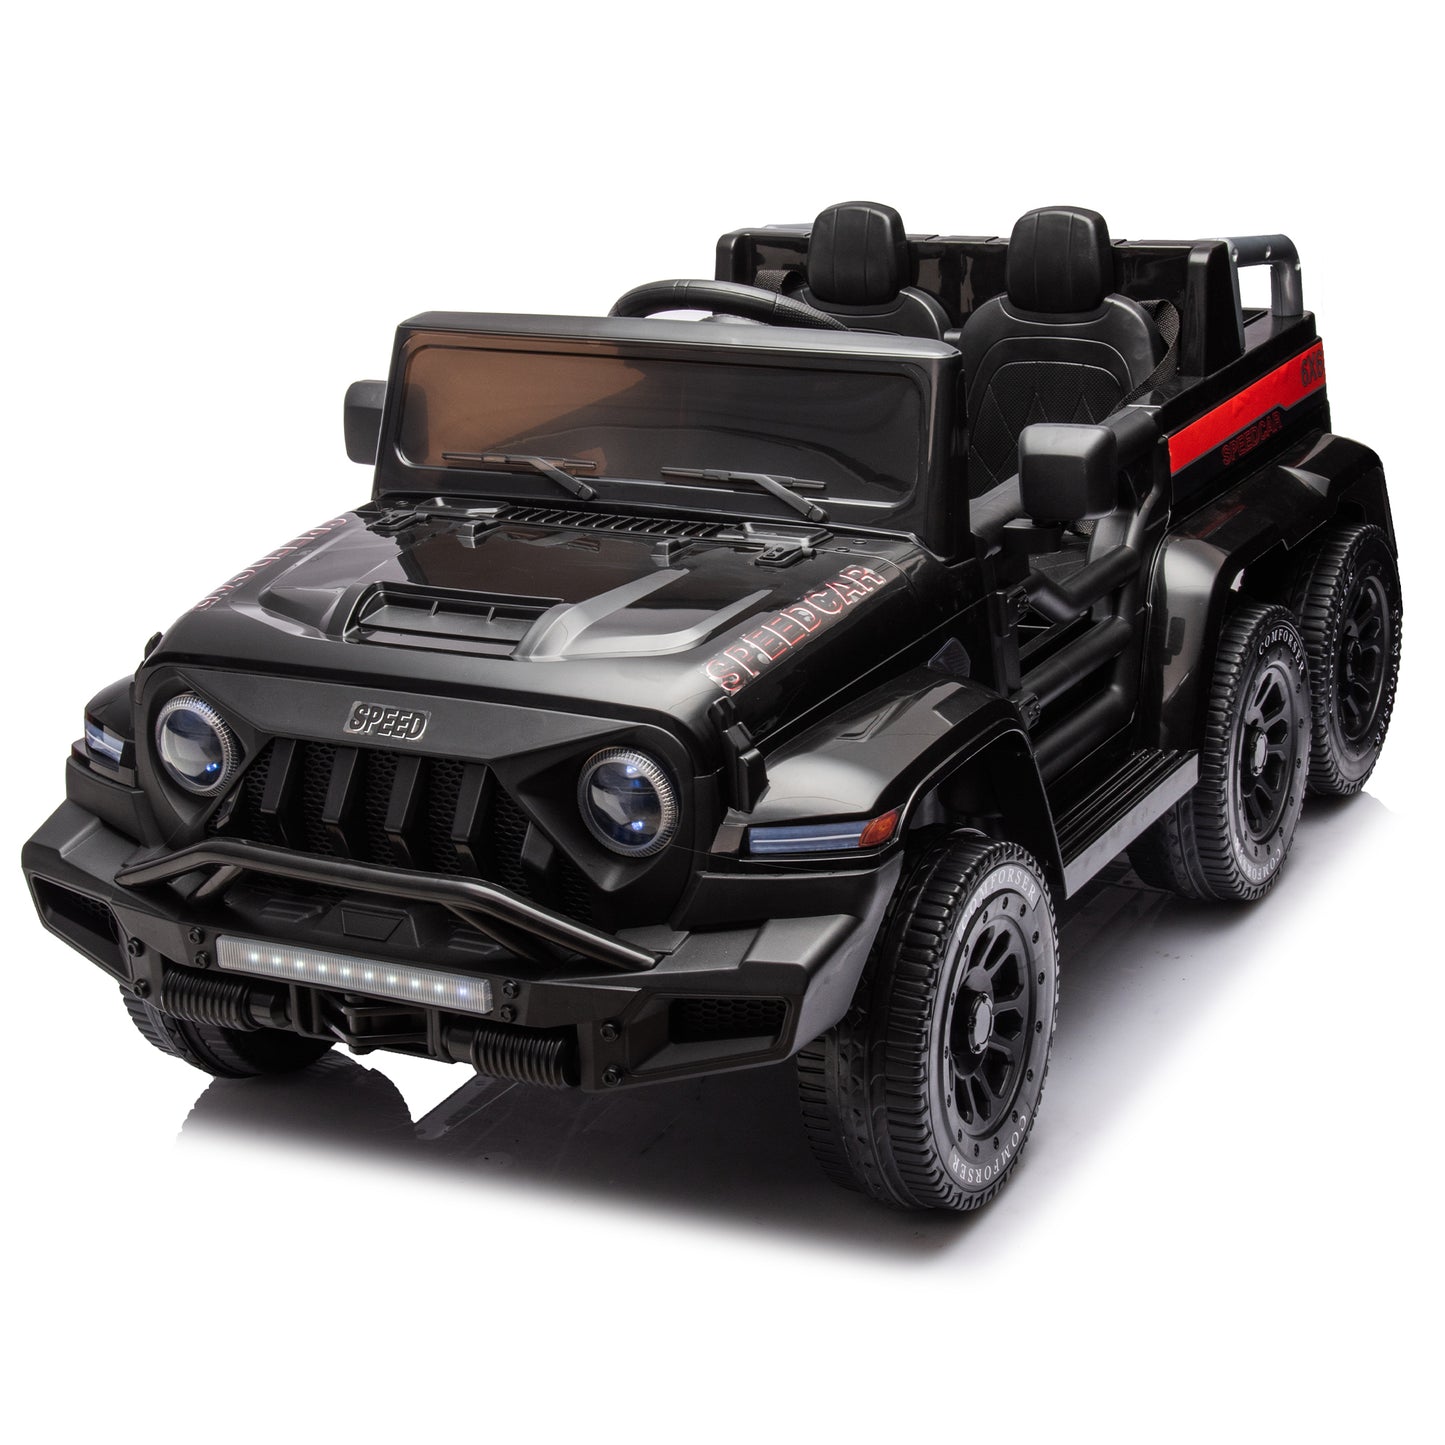 24V Ride On Car for Kids Battery Powered Ride On 4WD Toys with Remote Control,Parents Can Assist in Driving,Music and Lights,Five-Point Safety Belt,Rocking chair mode for back-and-forth swinging